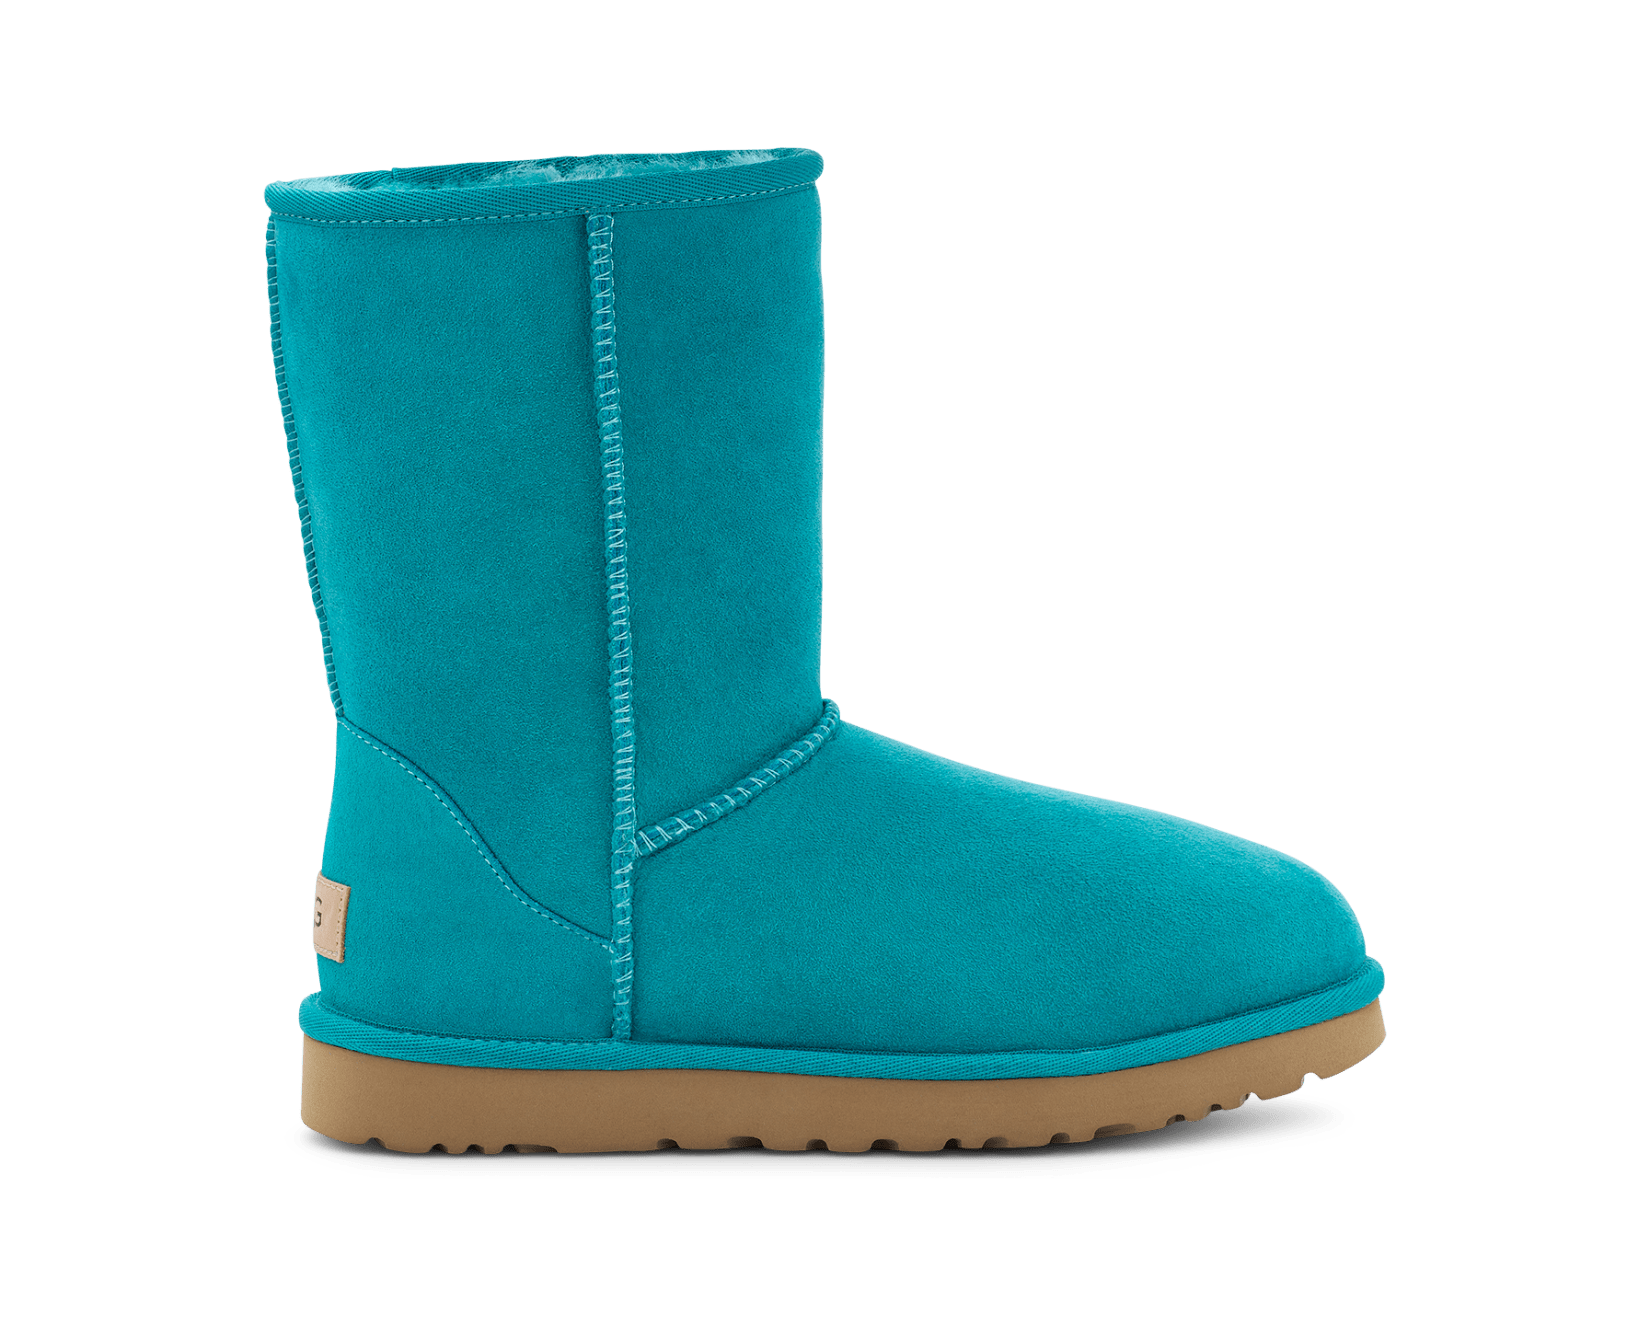 Women's UGG® Classic Boots Collection